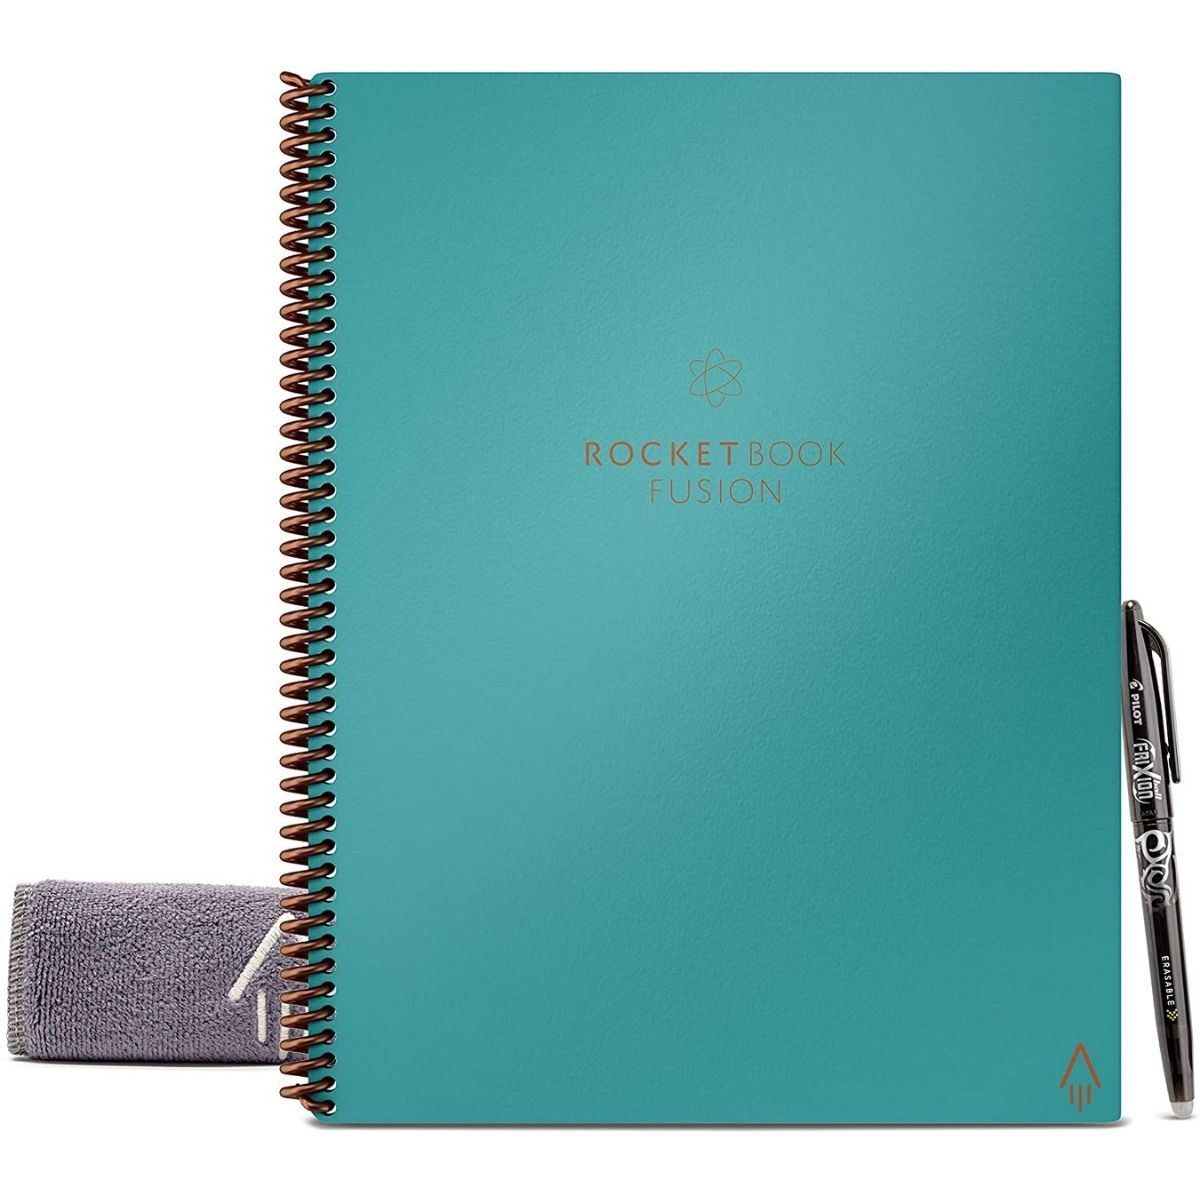 The Best Home Office Gifts Option: Rocketbook Fusion Smart Reusable Notebook